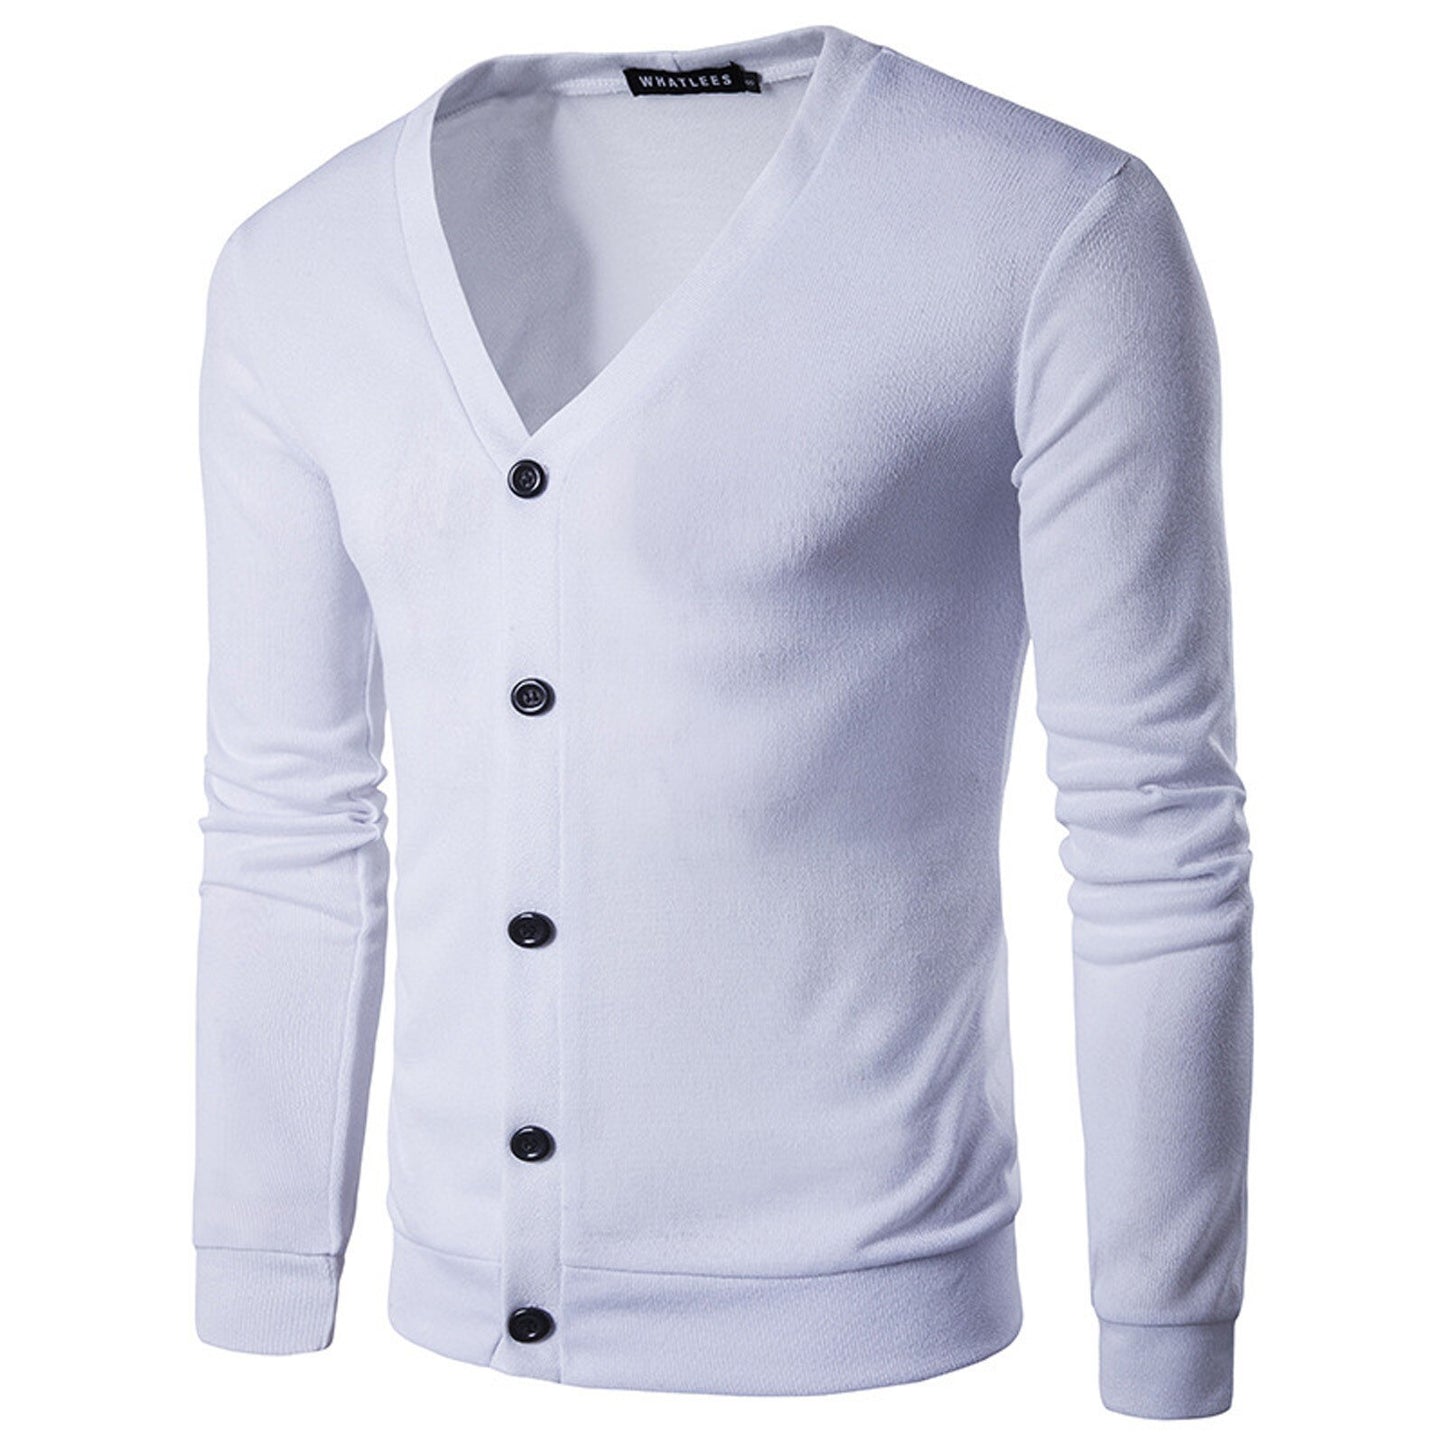 Men's Youth Fashion Solid Color V-Neck Long Sleeve Slim Fit Sweater